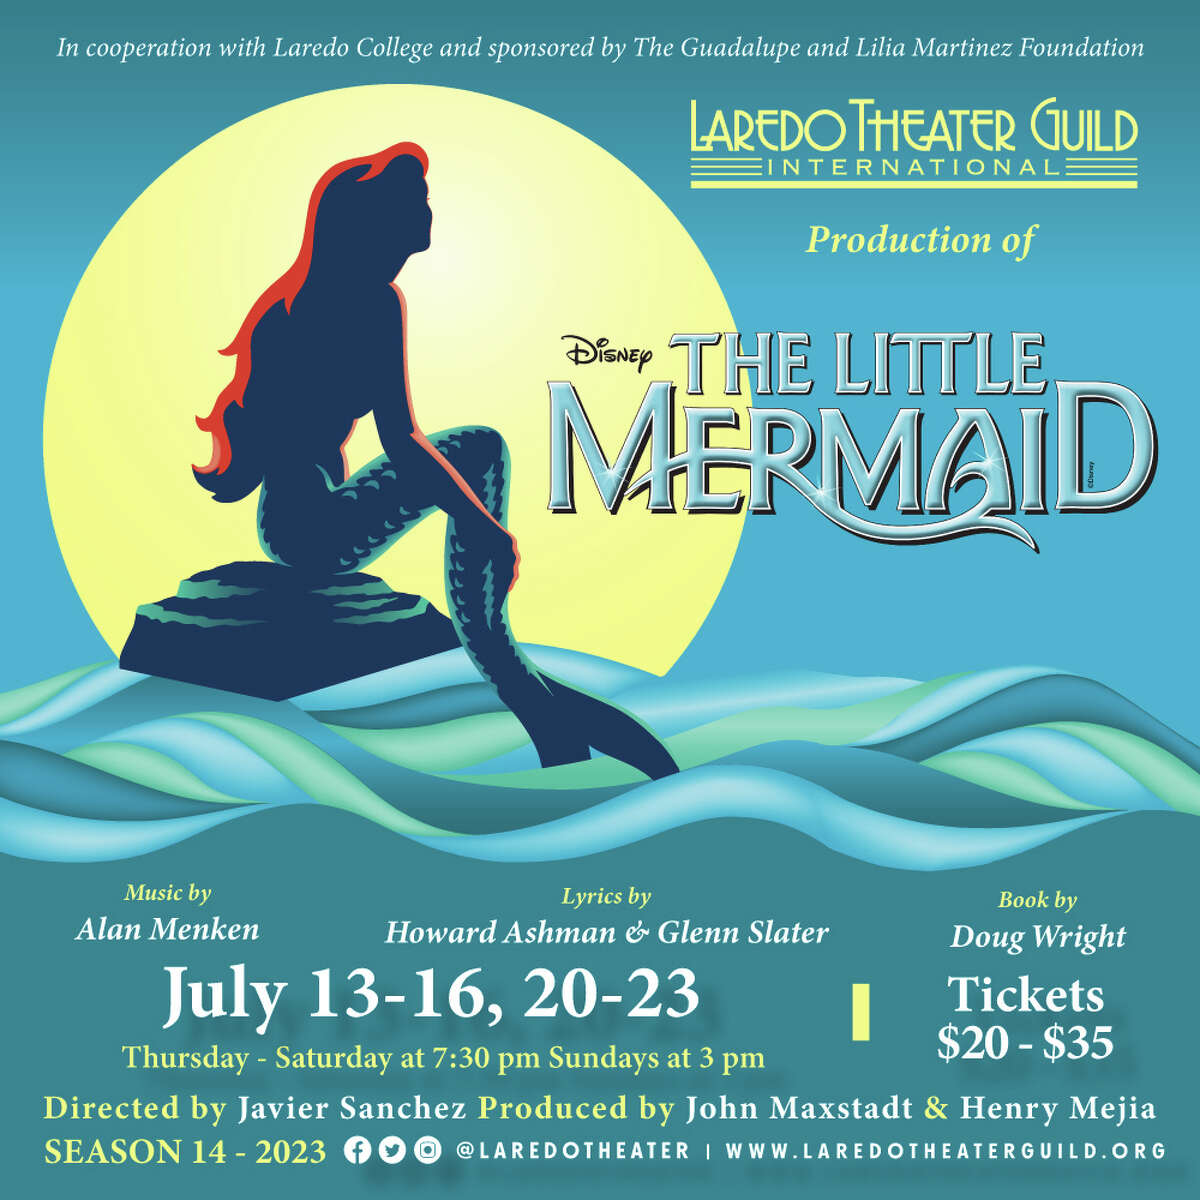 Laredo Theater Guild International will perform "Disney's The Little Mermaid" at Laredo College in July. 